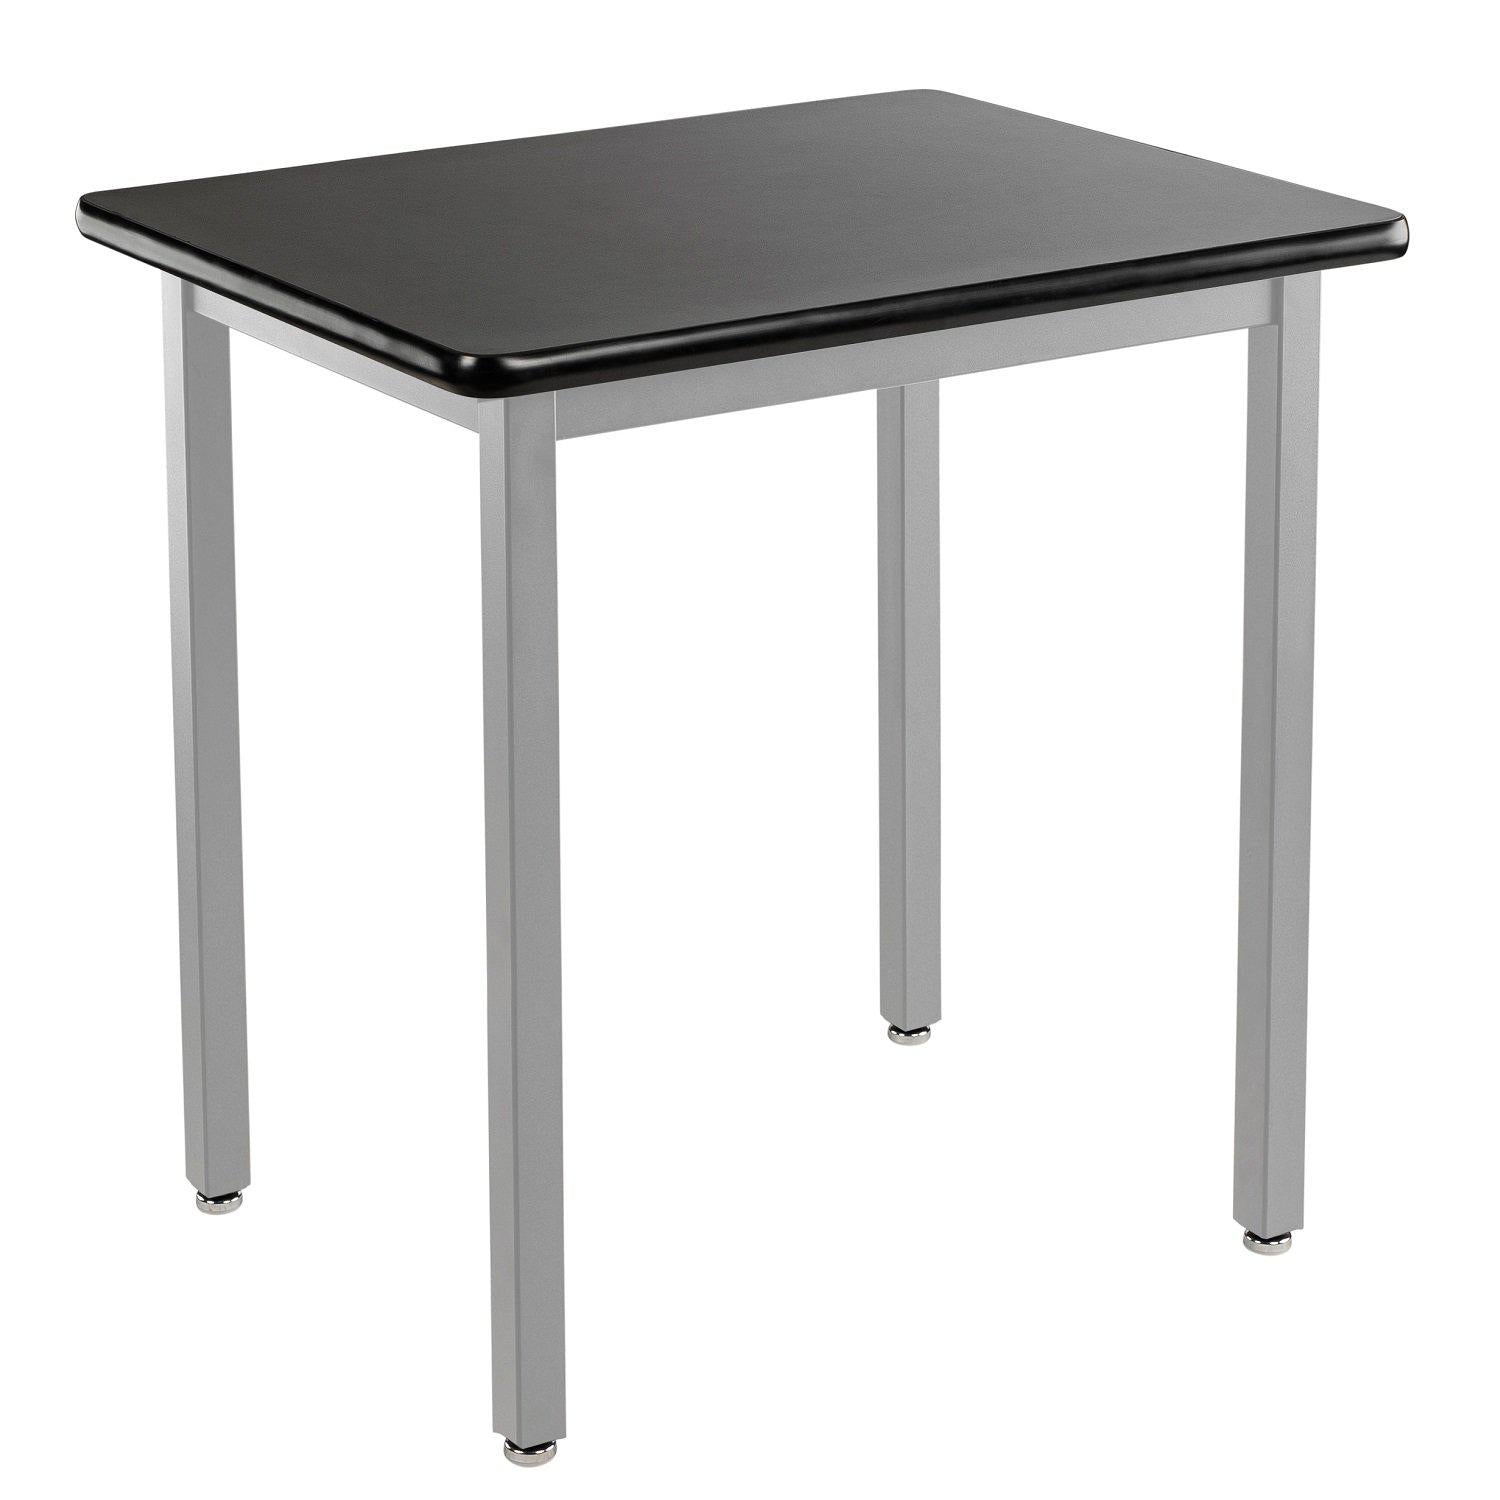 Heavy-Duty Fixed Height Utility Table, Soft Grey Frame, 30" x 30", High-Pressure Laminate Top with T-Mold Edge